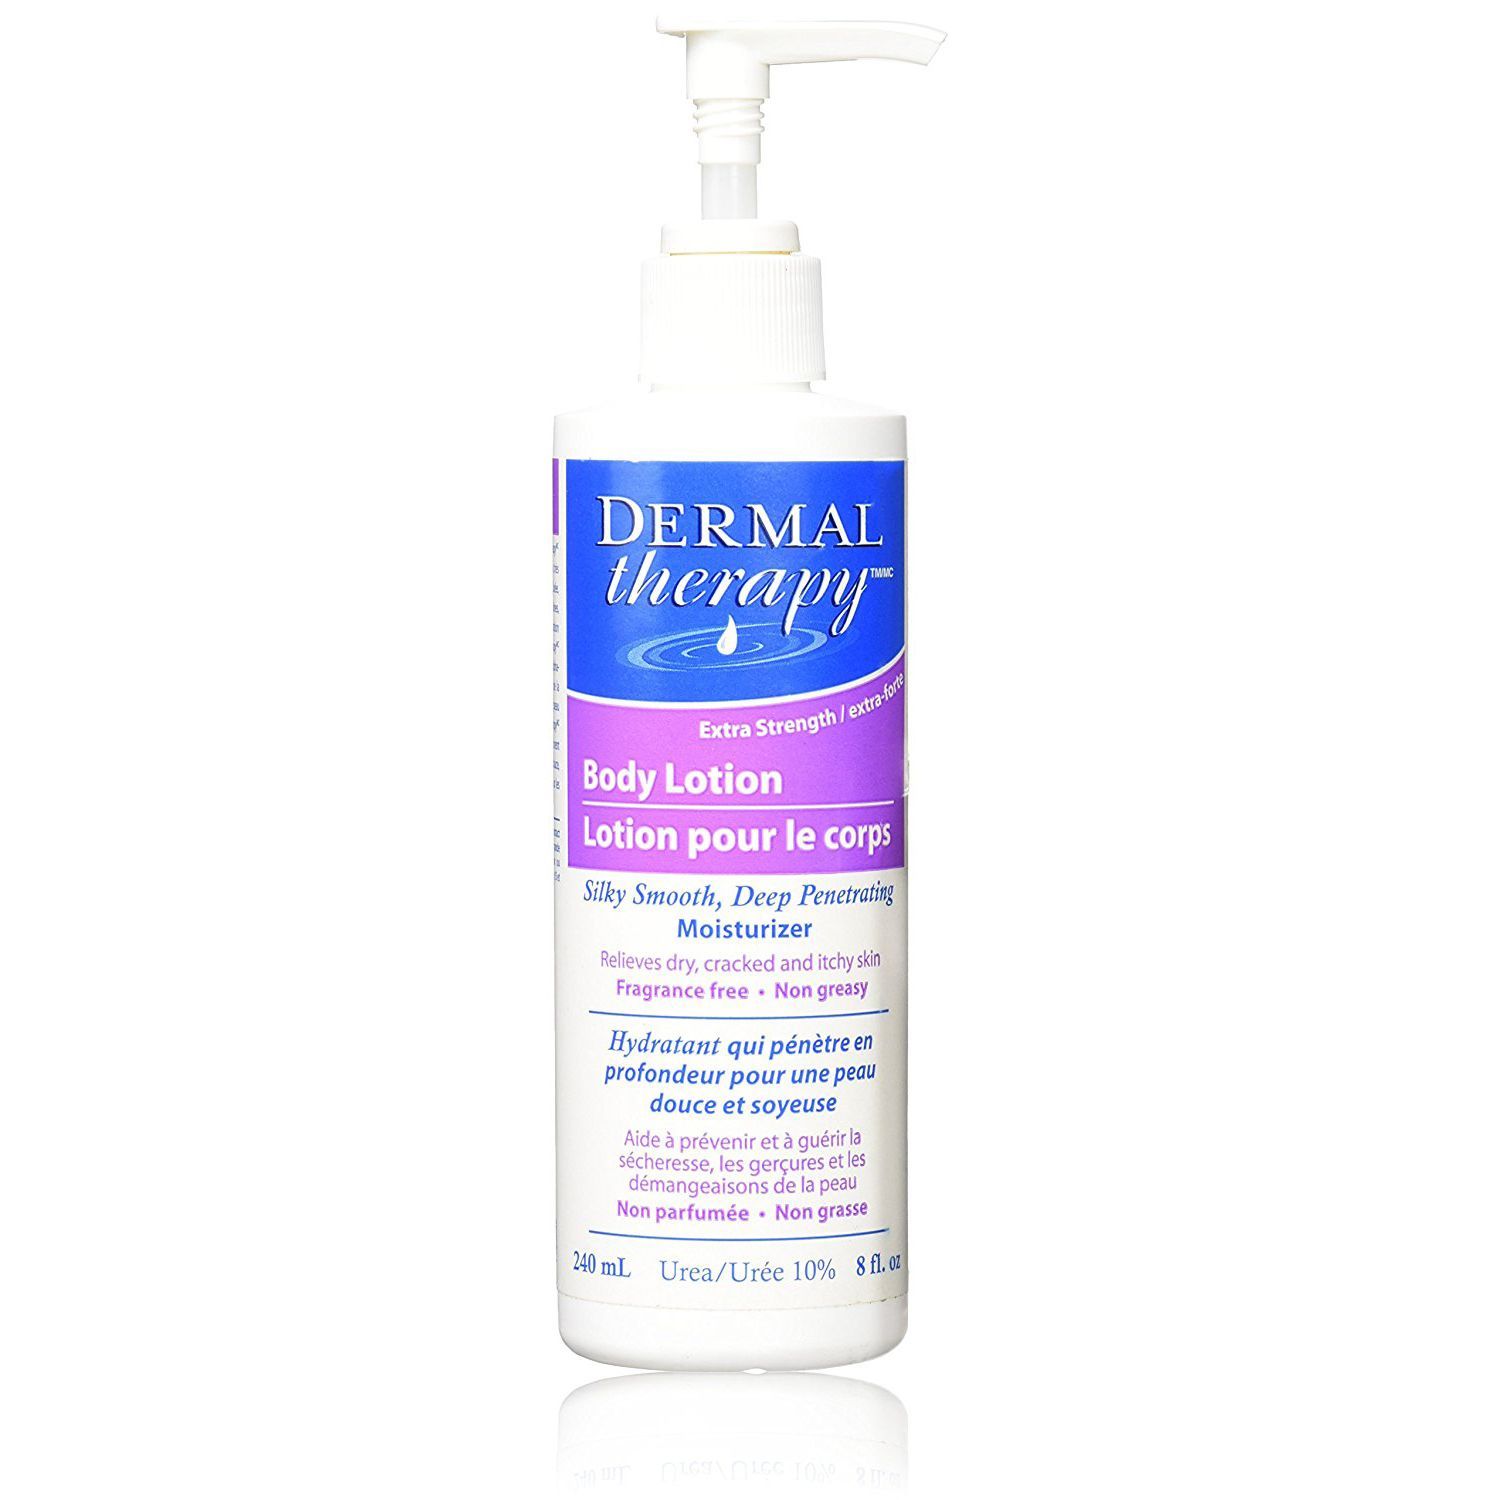 Dermal Therapy Body Lotion 